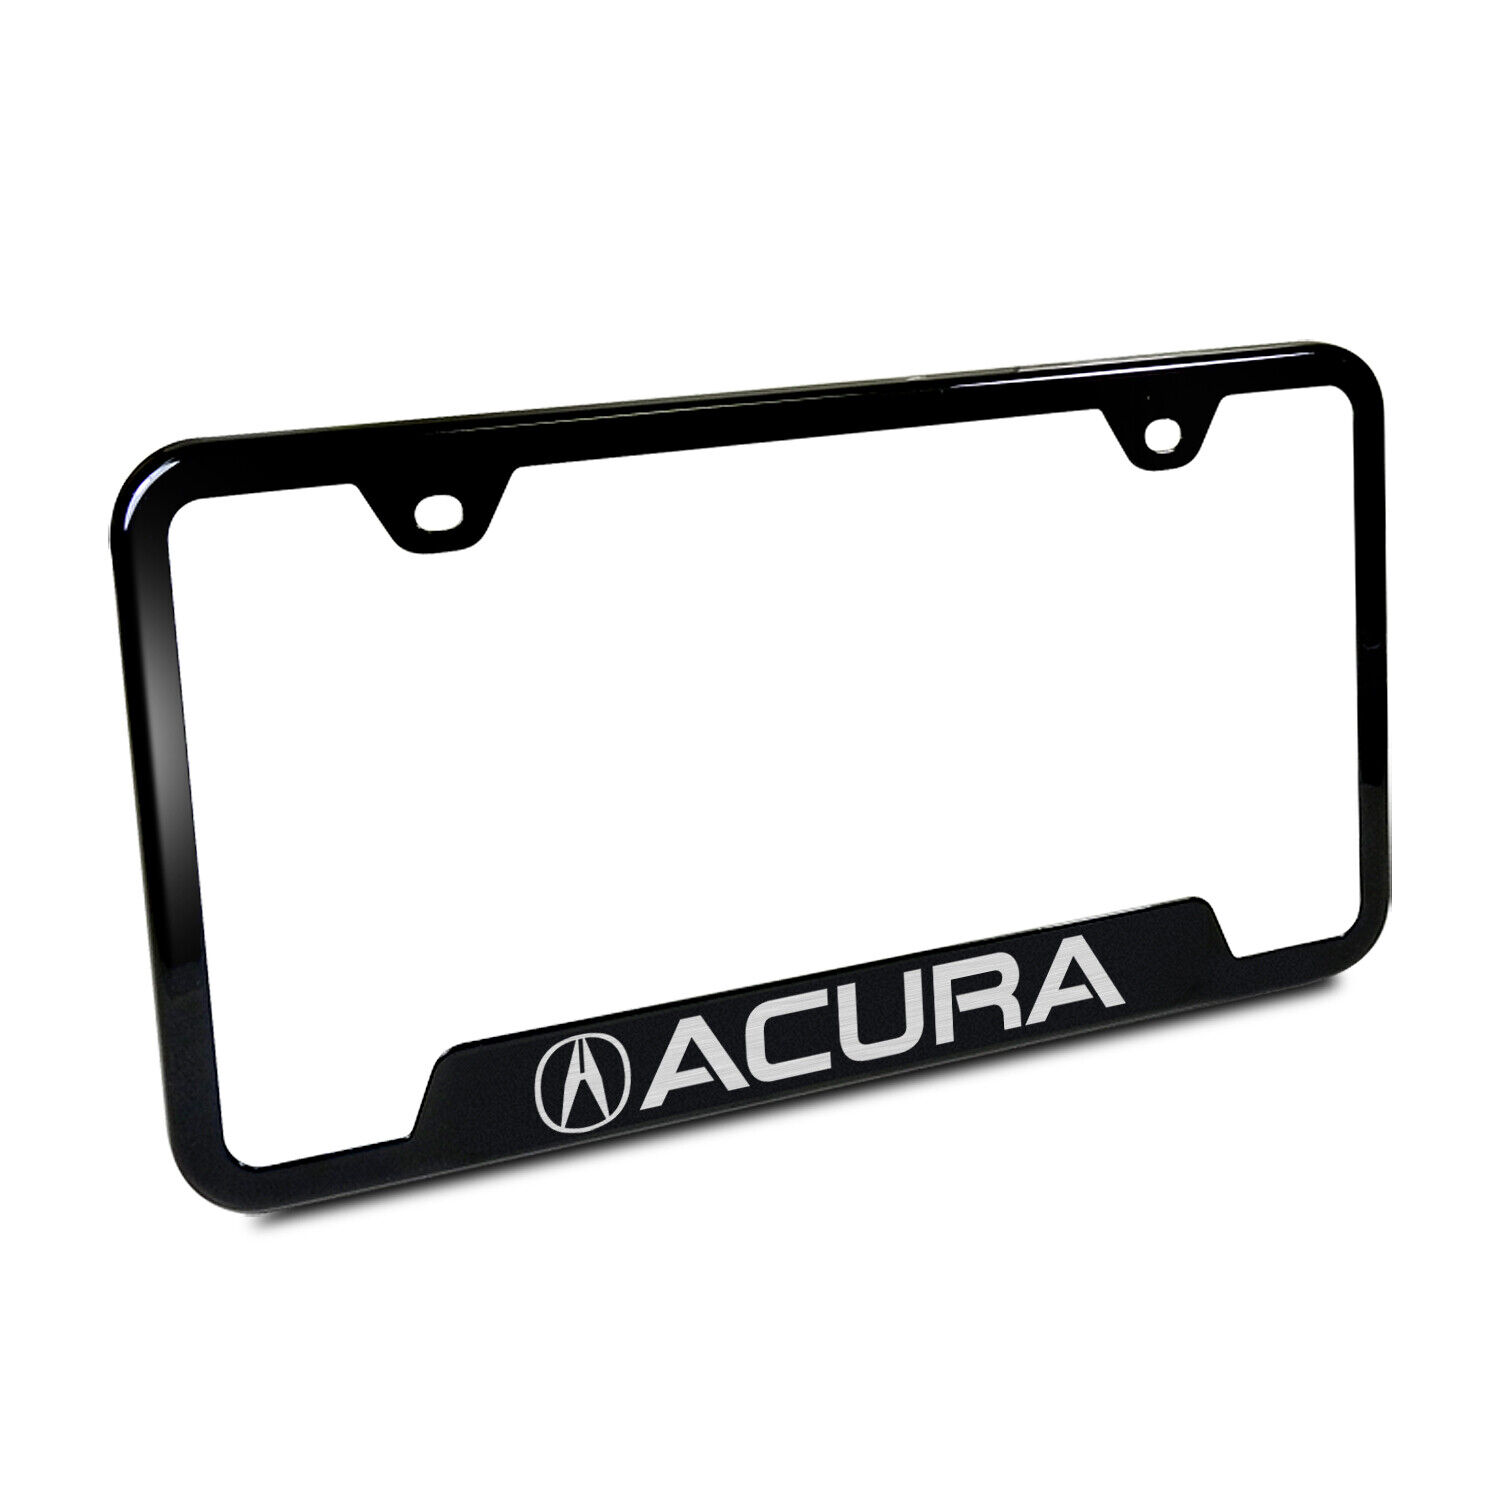 Acura Black Stainless Steel 50 States License Plate Frame